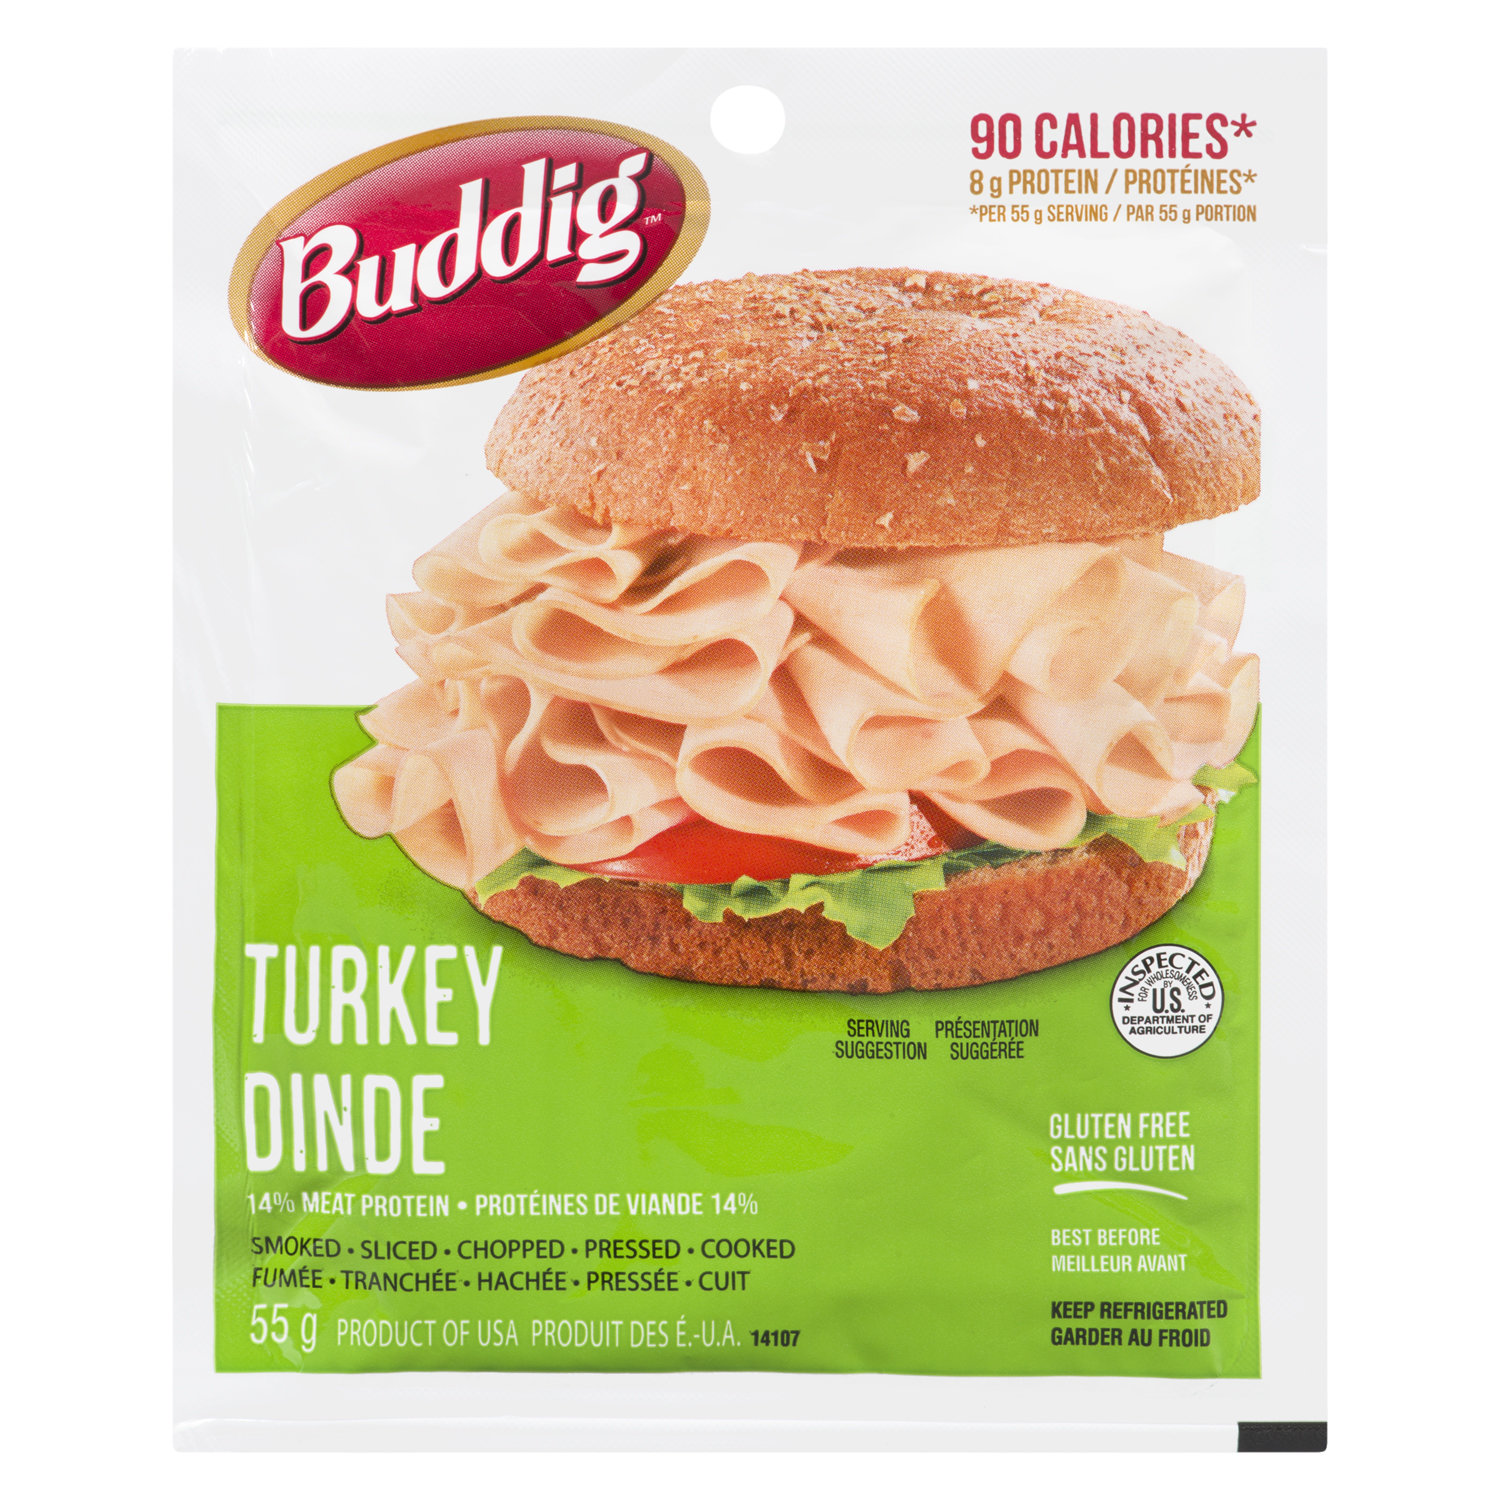 Clinton Save A Lot - NEW at Save-A-Lot. Turkey Chops!! Healthy Turkey  Breast cut into convenient slices perfect for the oven or grill !!  Convenient and good for you! See Jon or